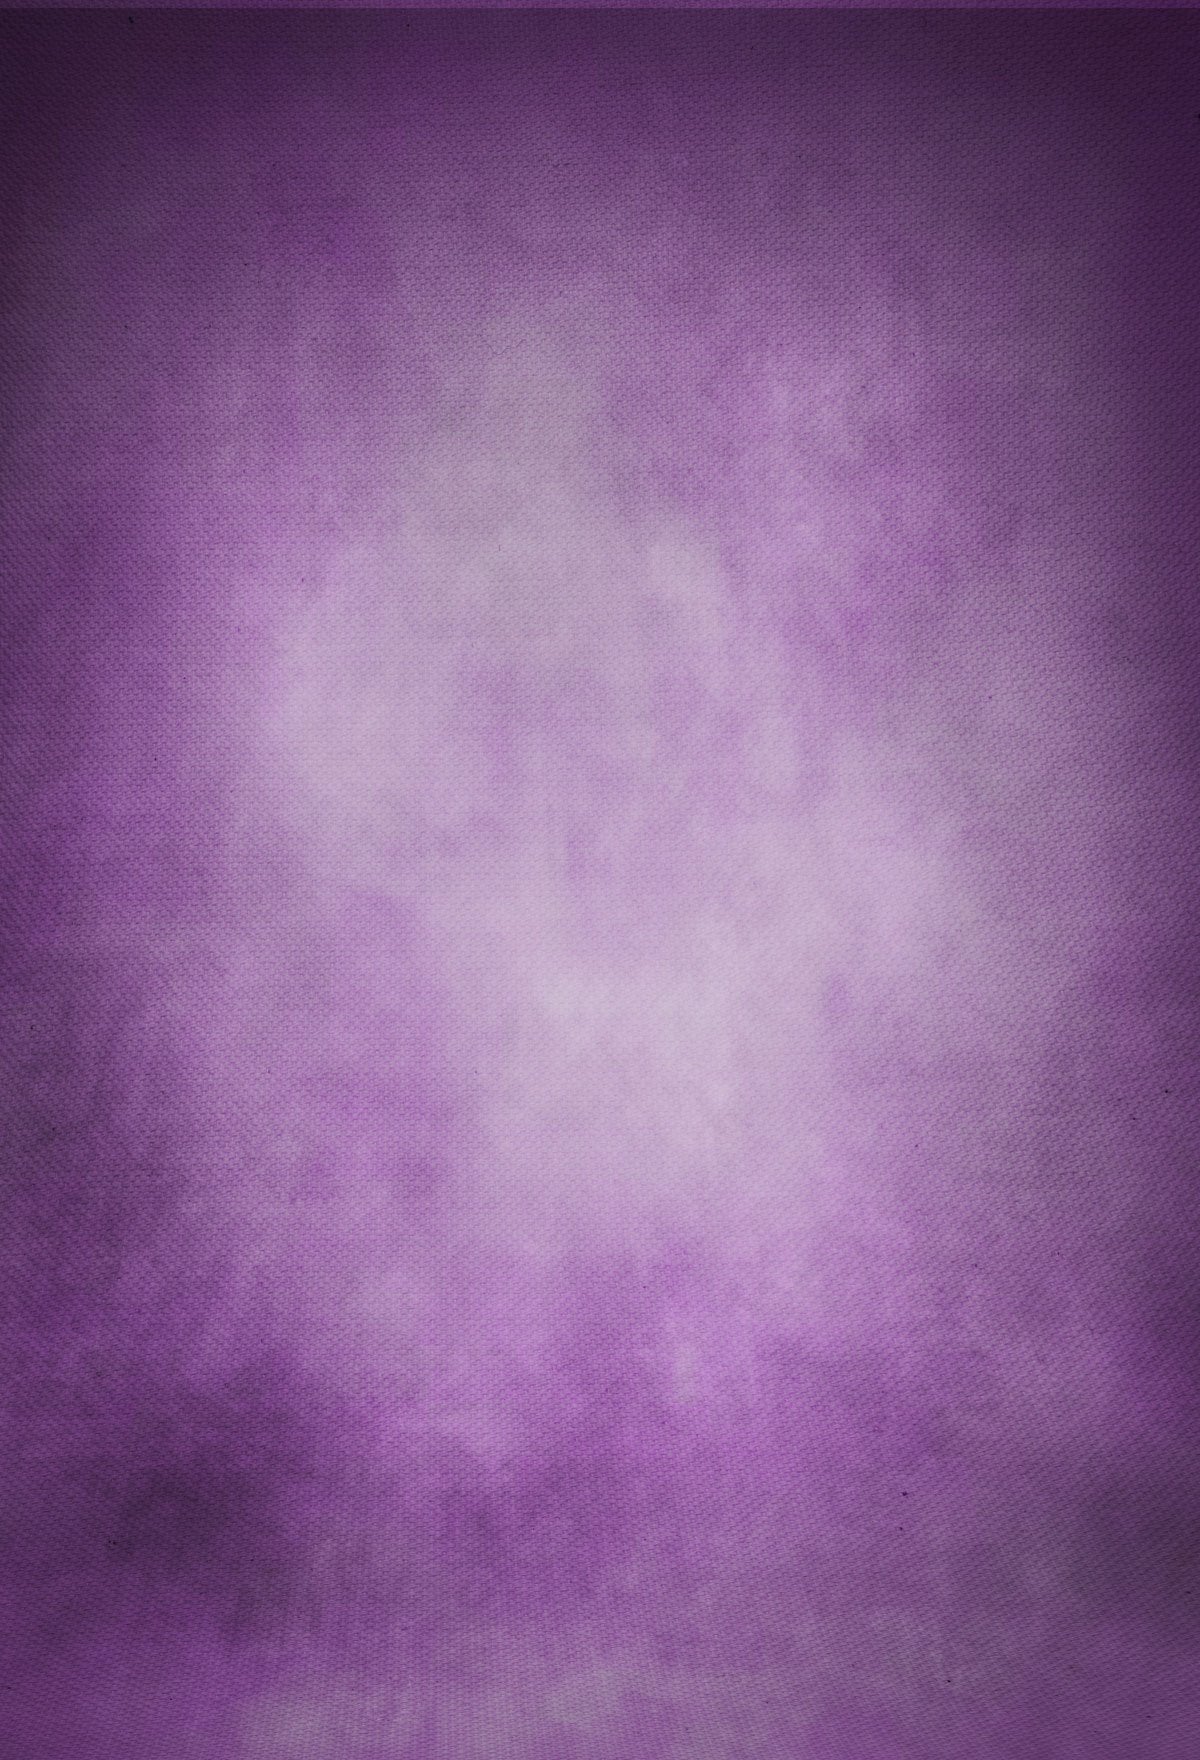 Kate Dark Purple Abstract Texture Backdrop Designed by JFCC